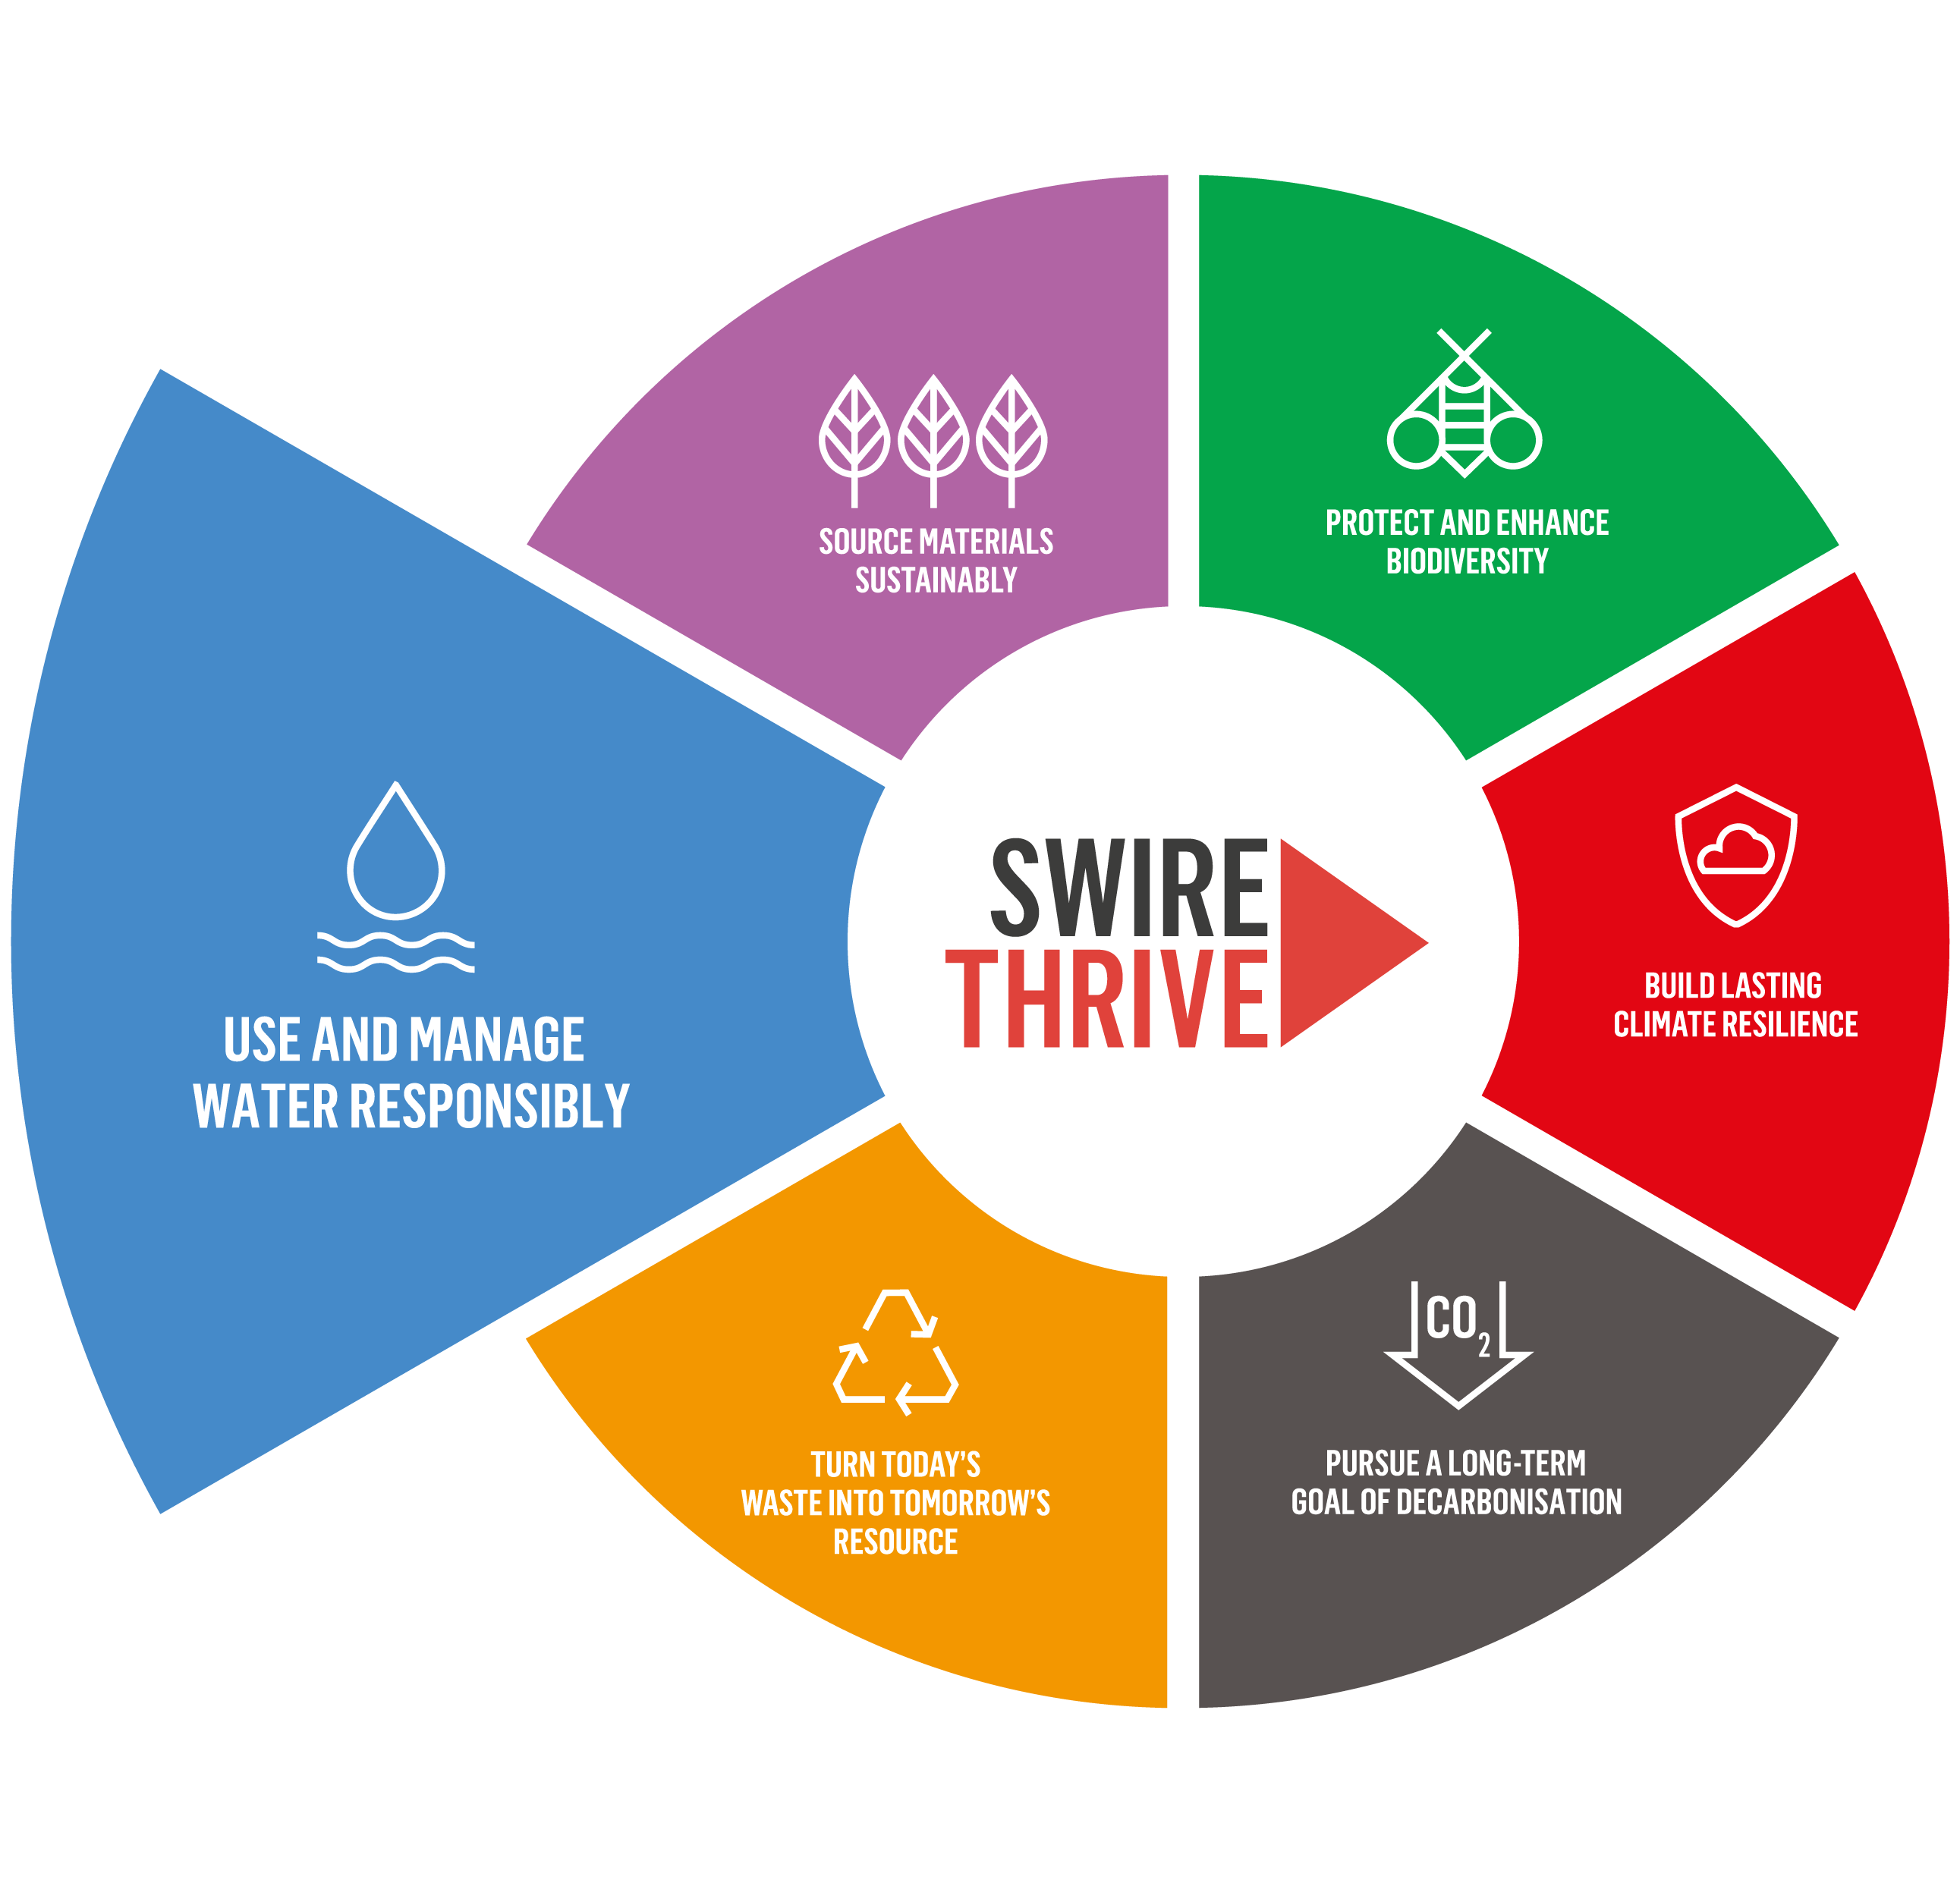 SWIRE THRIVE - Use and manage water responsibly